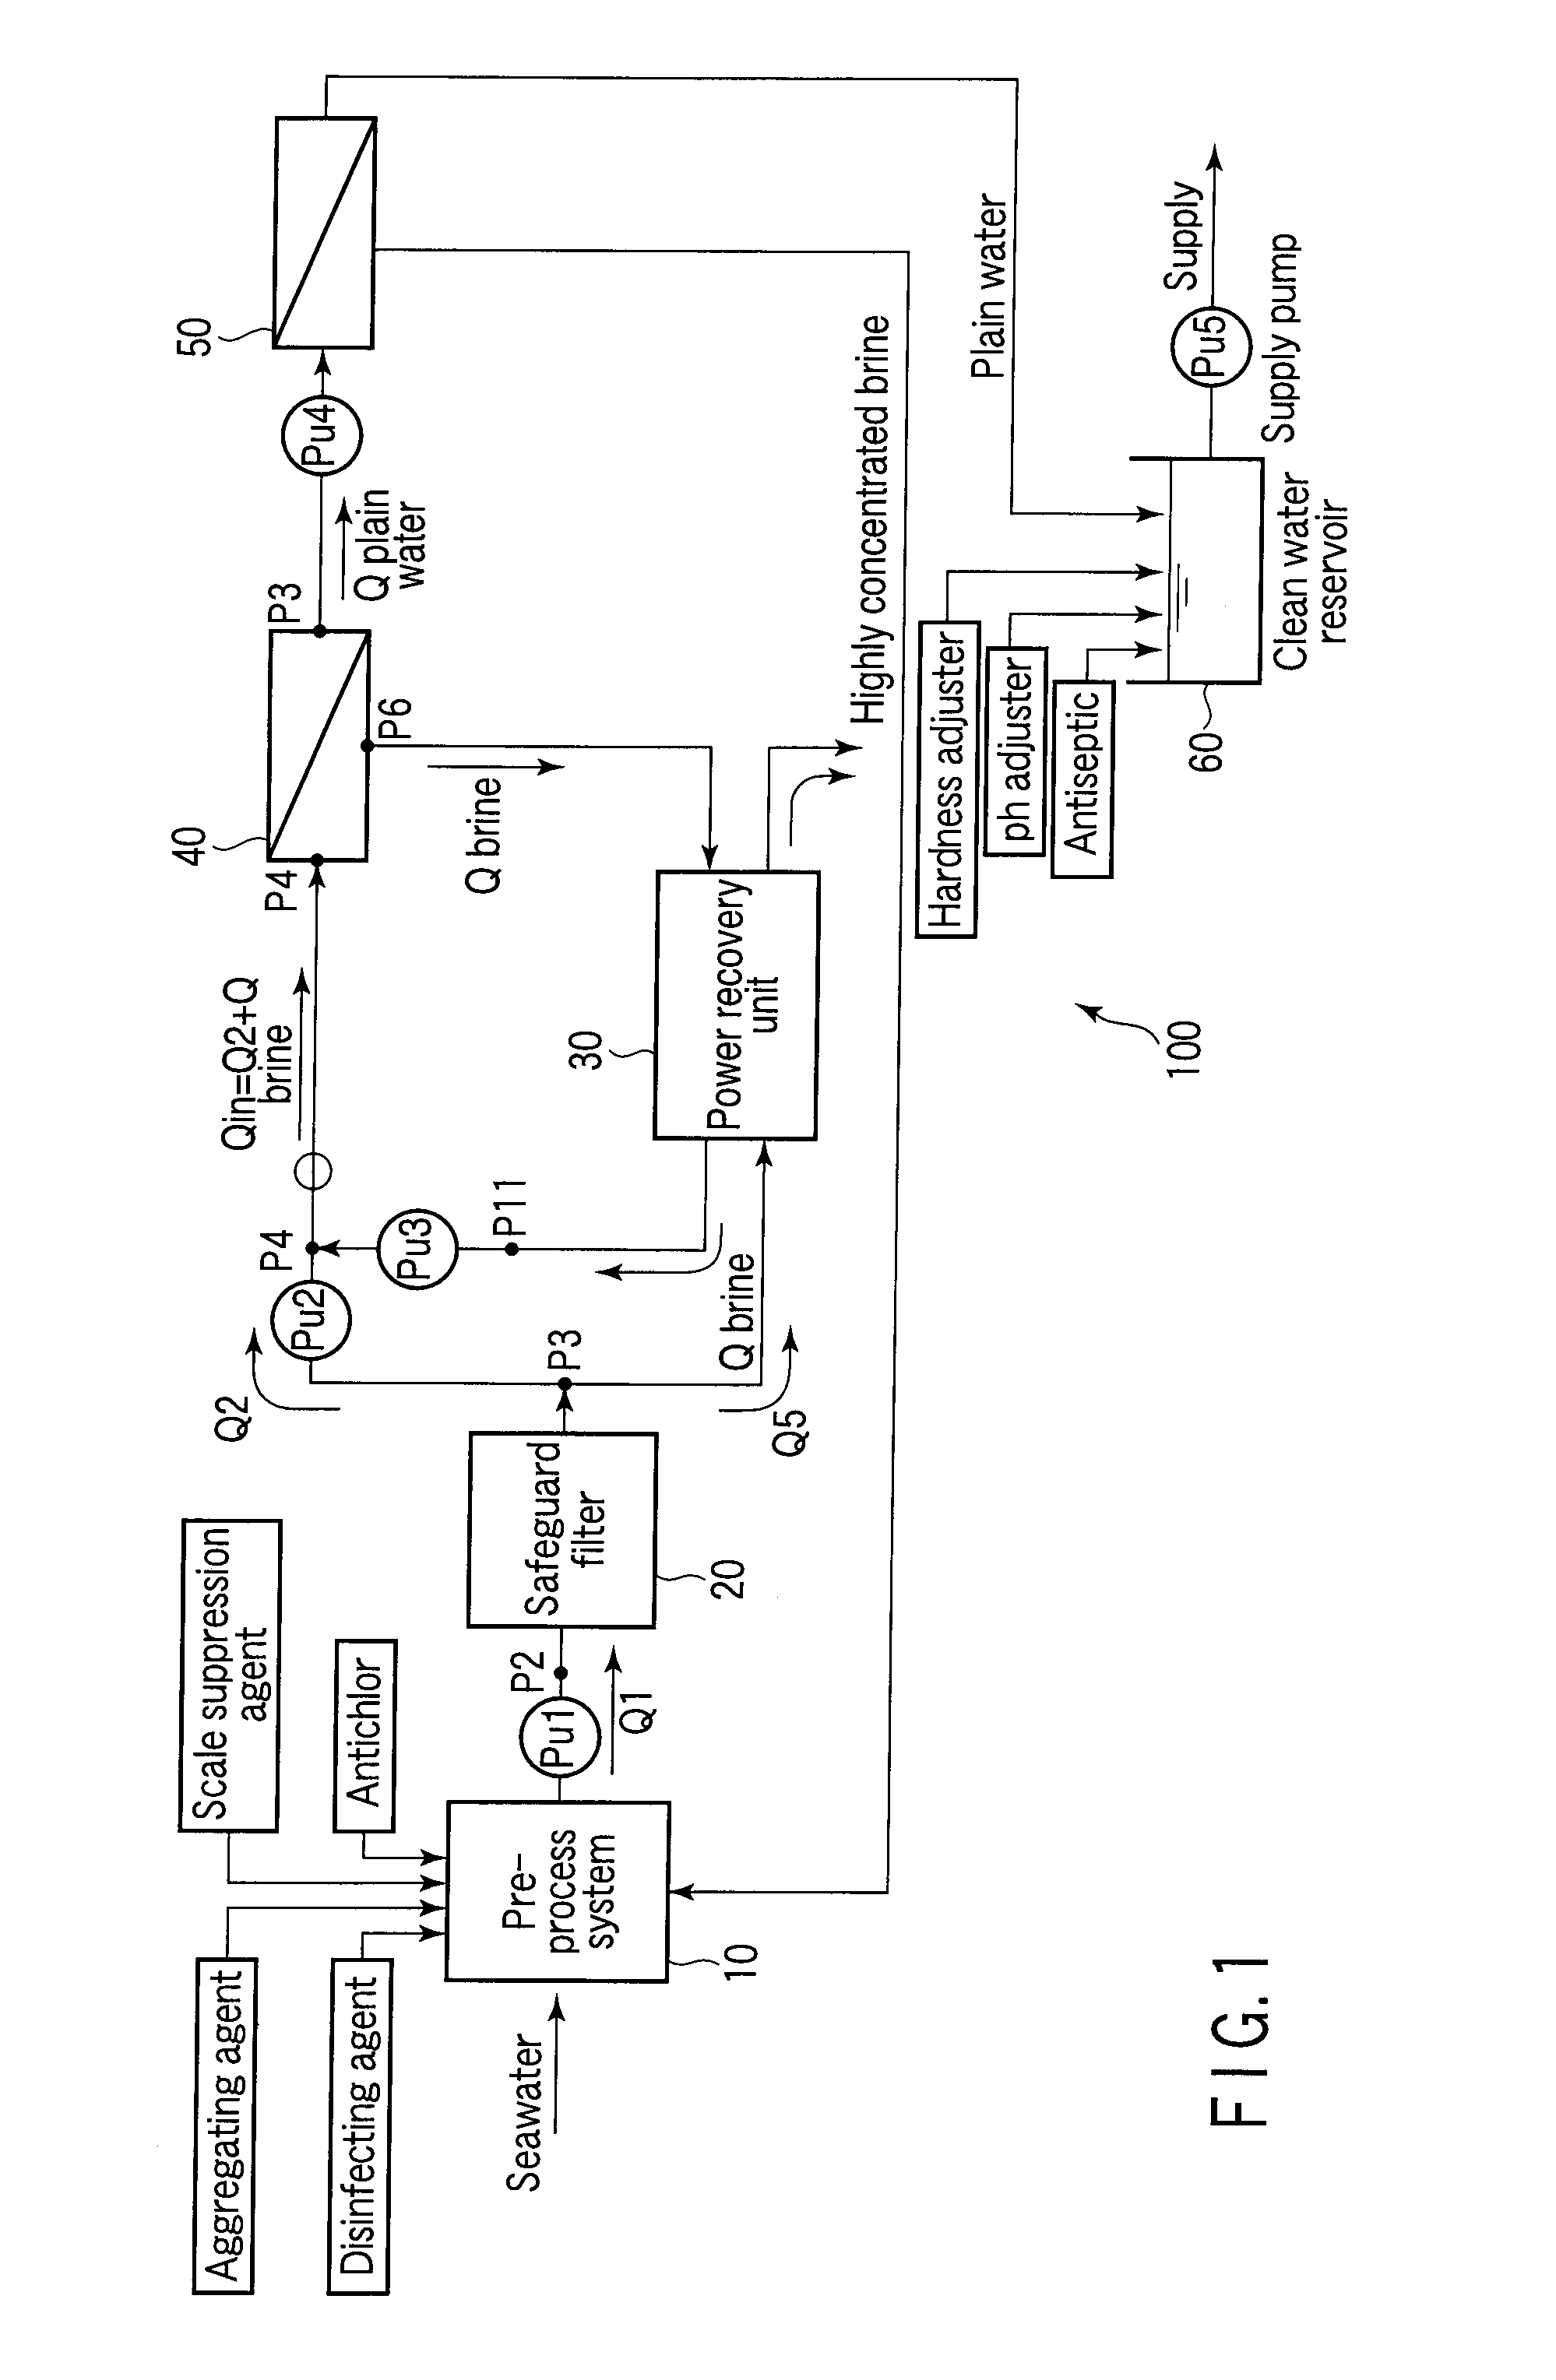 Flow channel switching device